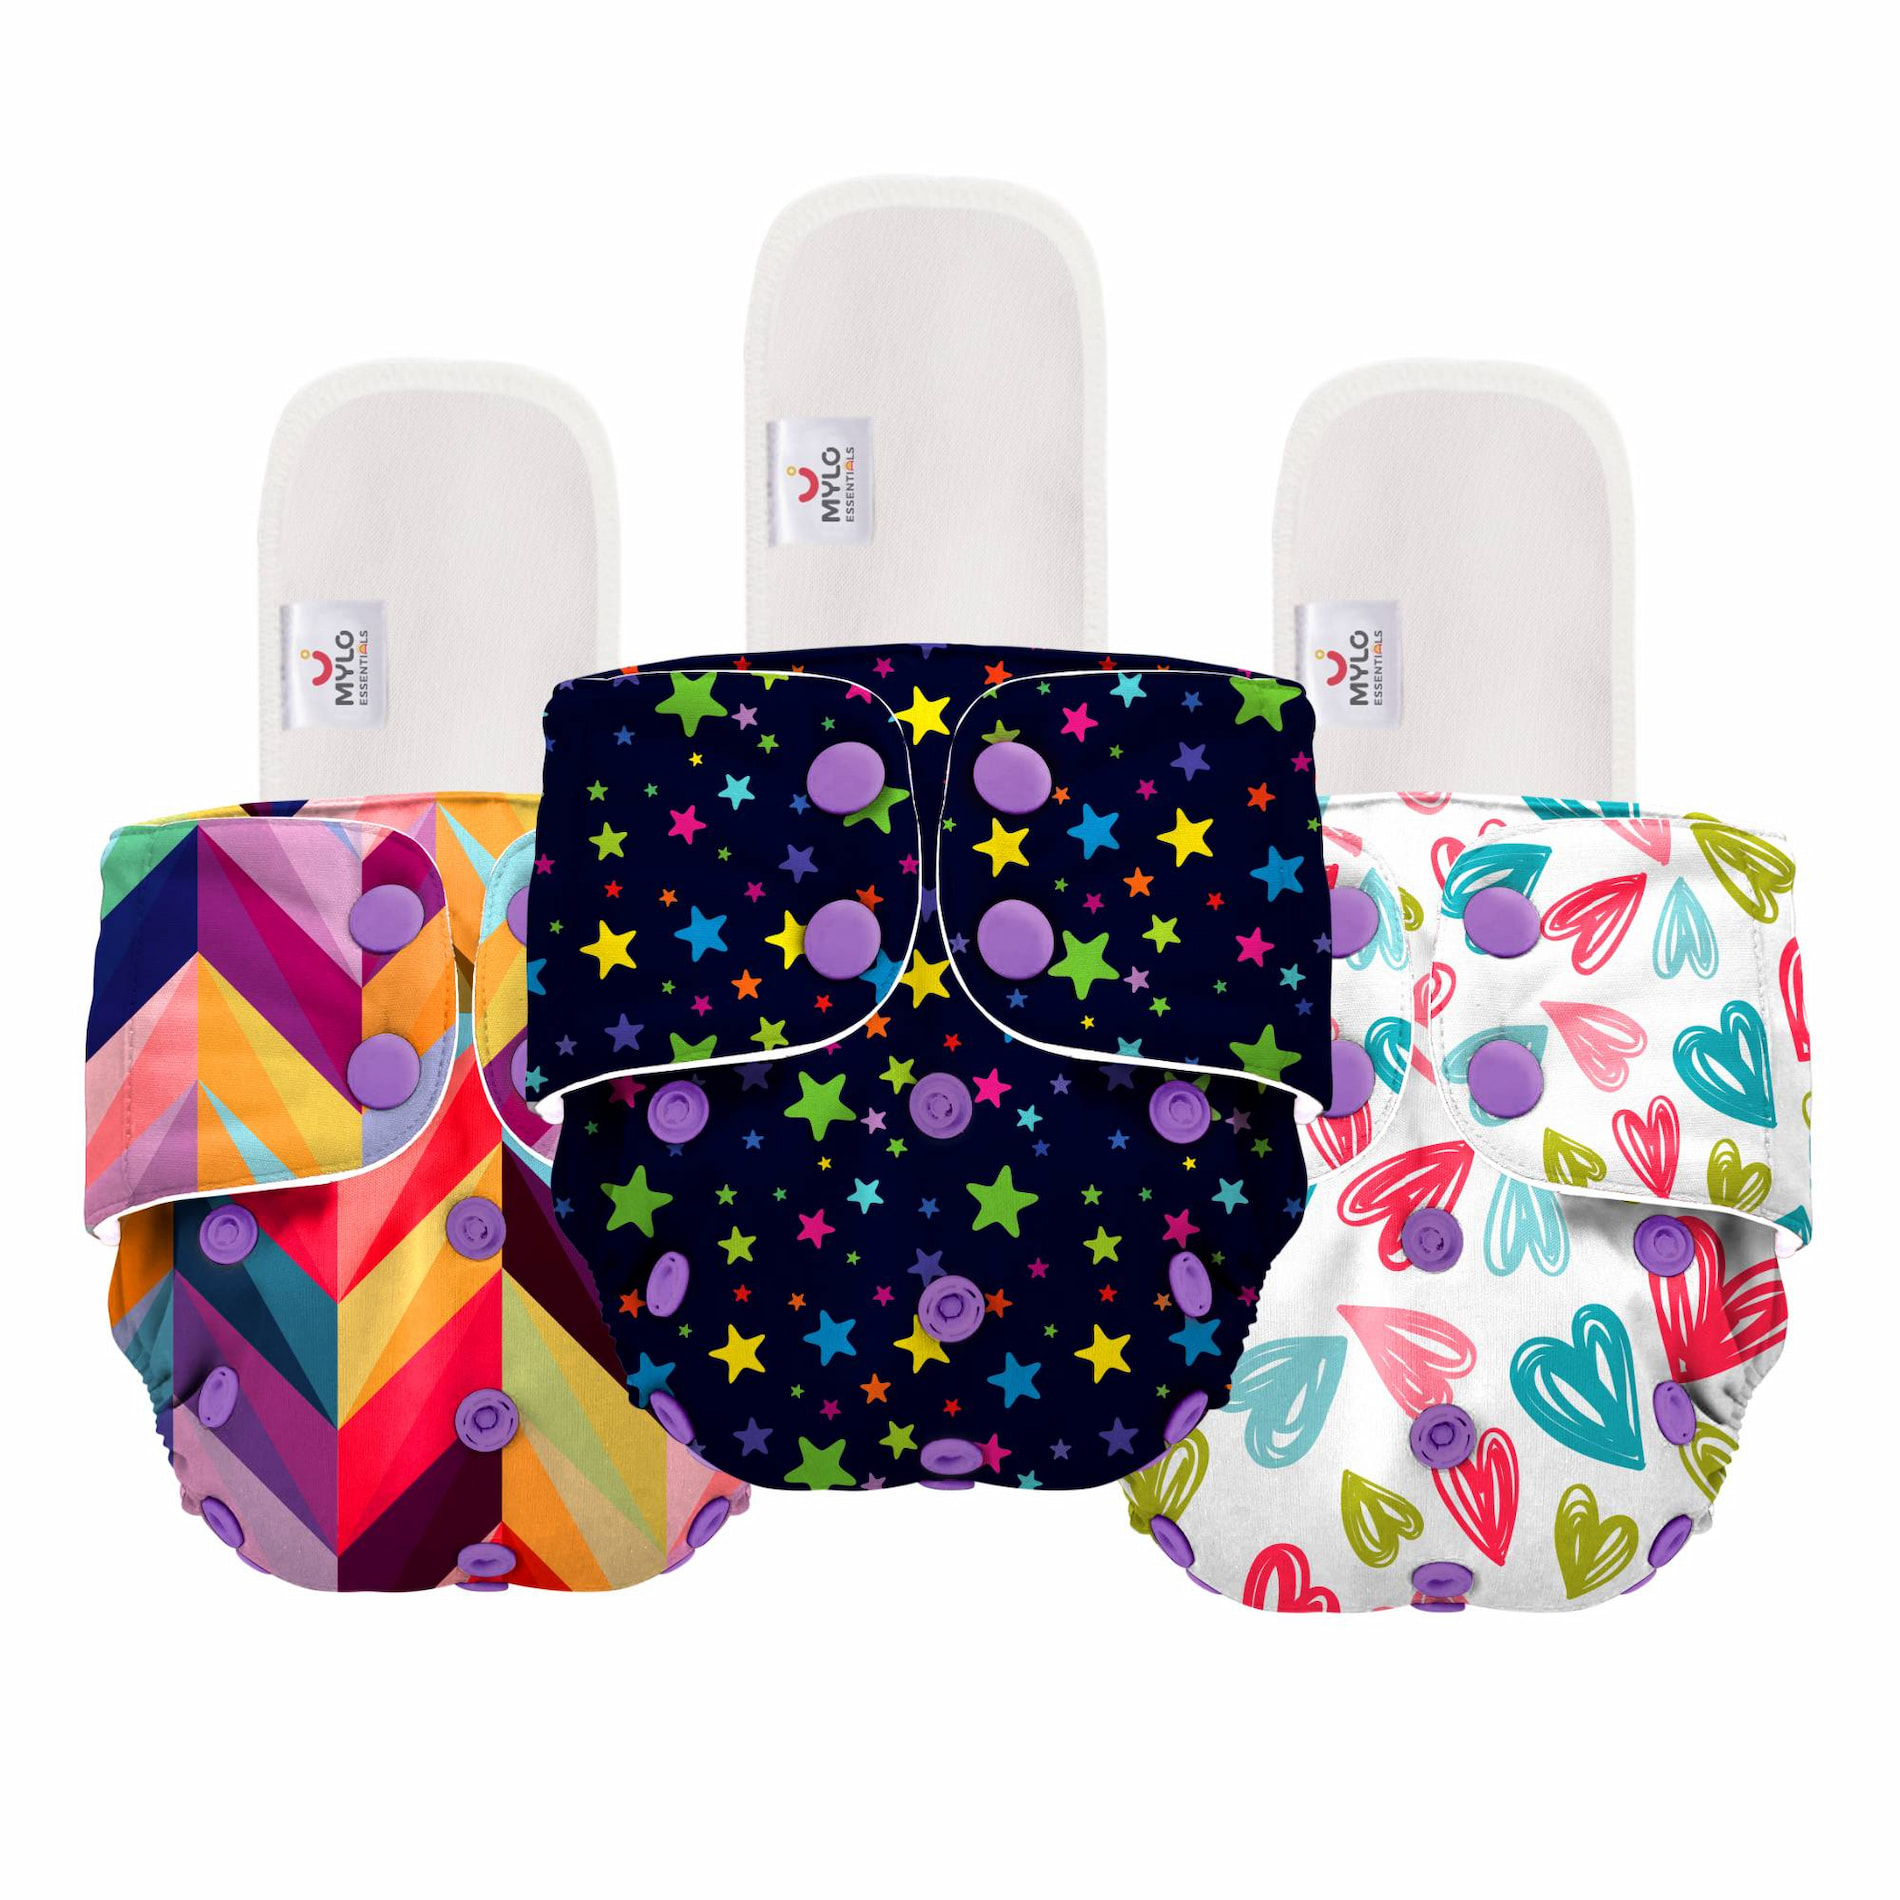 Mylo Adjustable Washable & Reusable Cloth Diaper With Dry Feel, Absorbent Insert Pad (3M-3Y) - Heart Doodles, ABC & Rainbow - Pack of 3